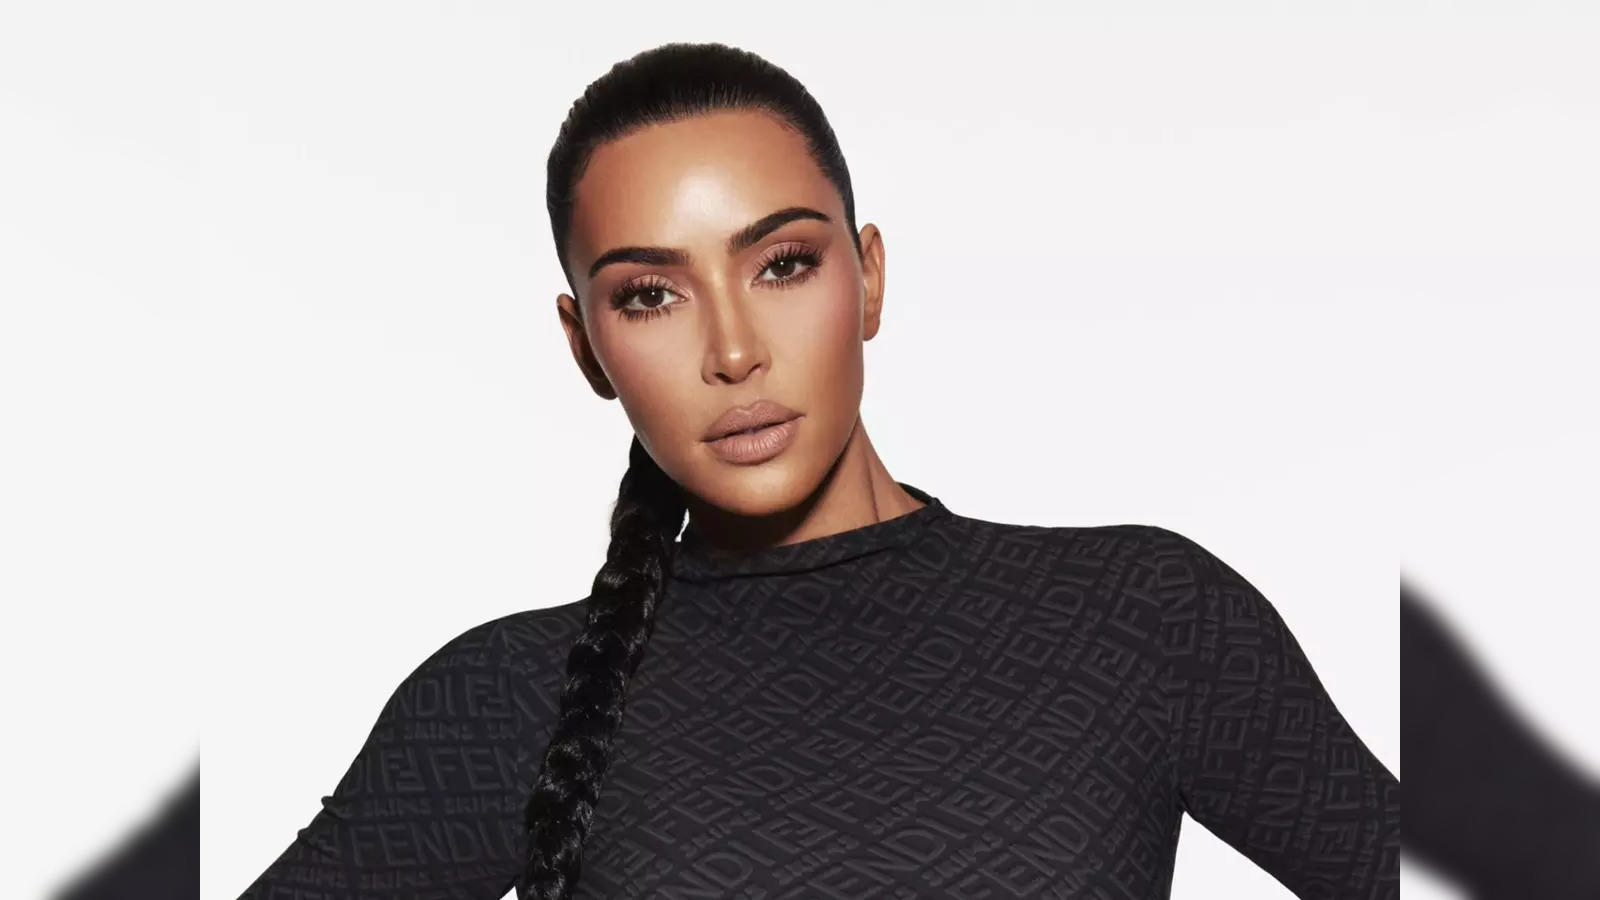 It's official: Fendi is collaborating with Kim Kardashian on an